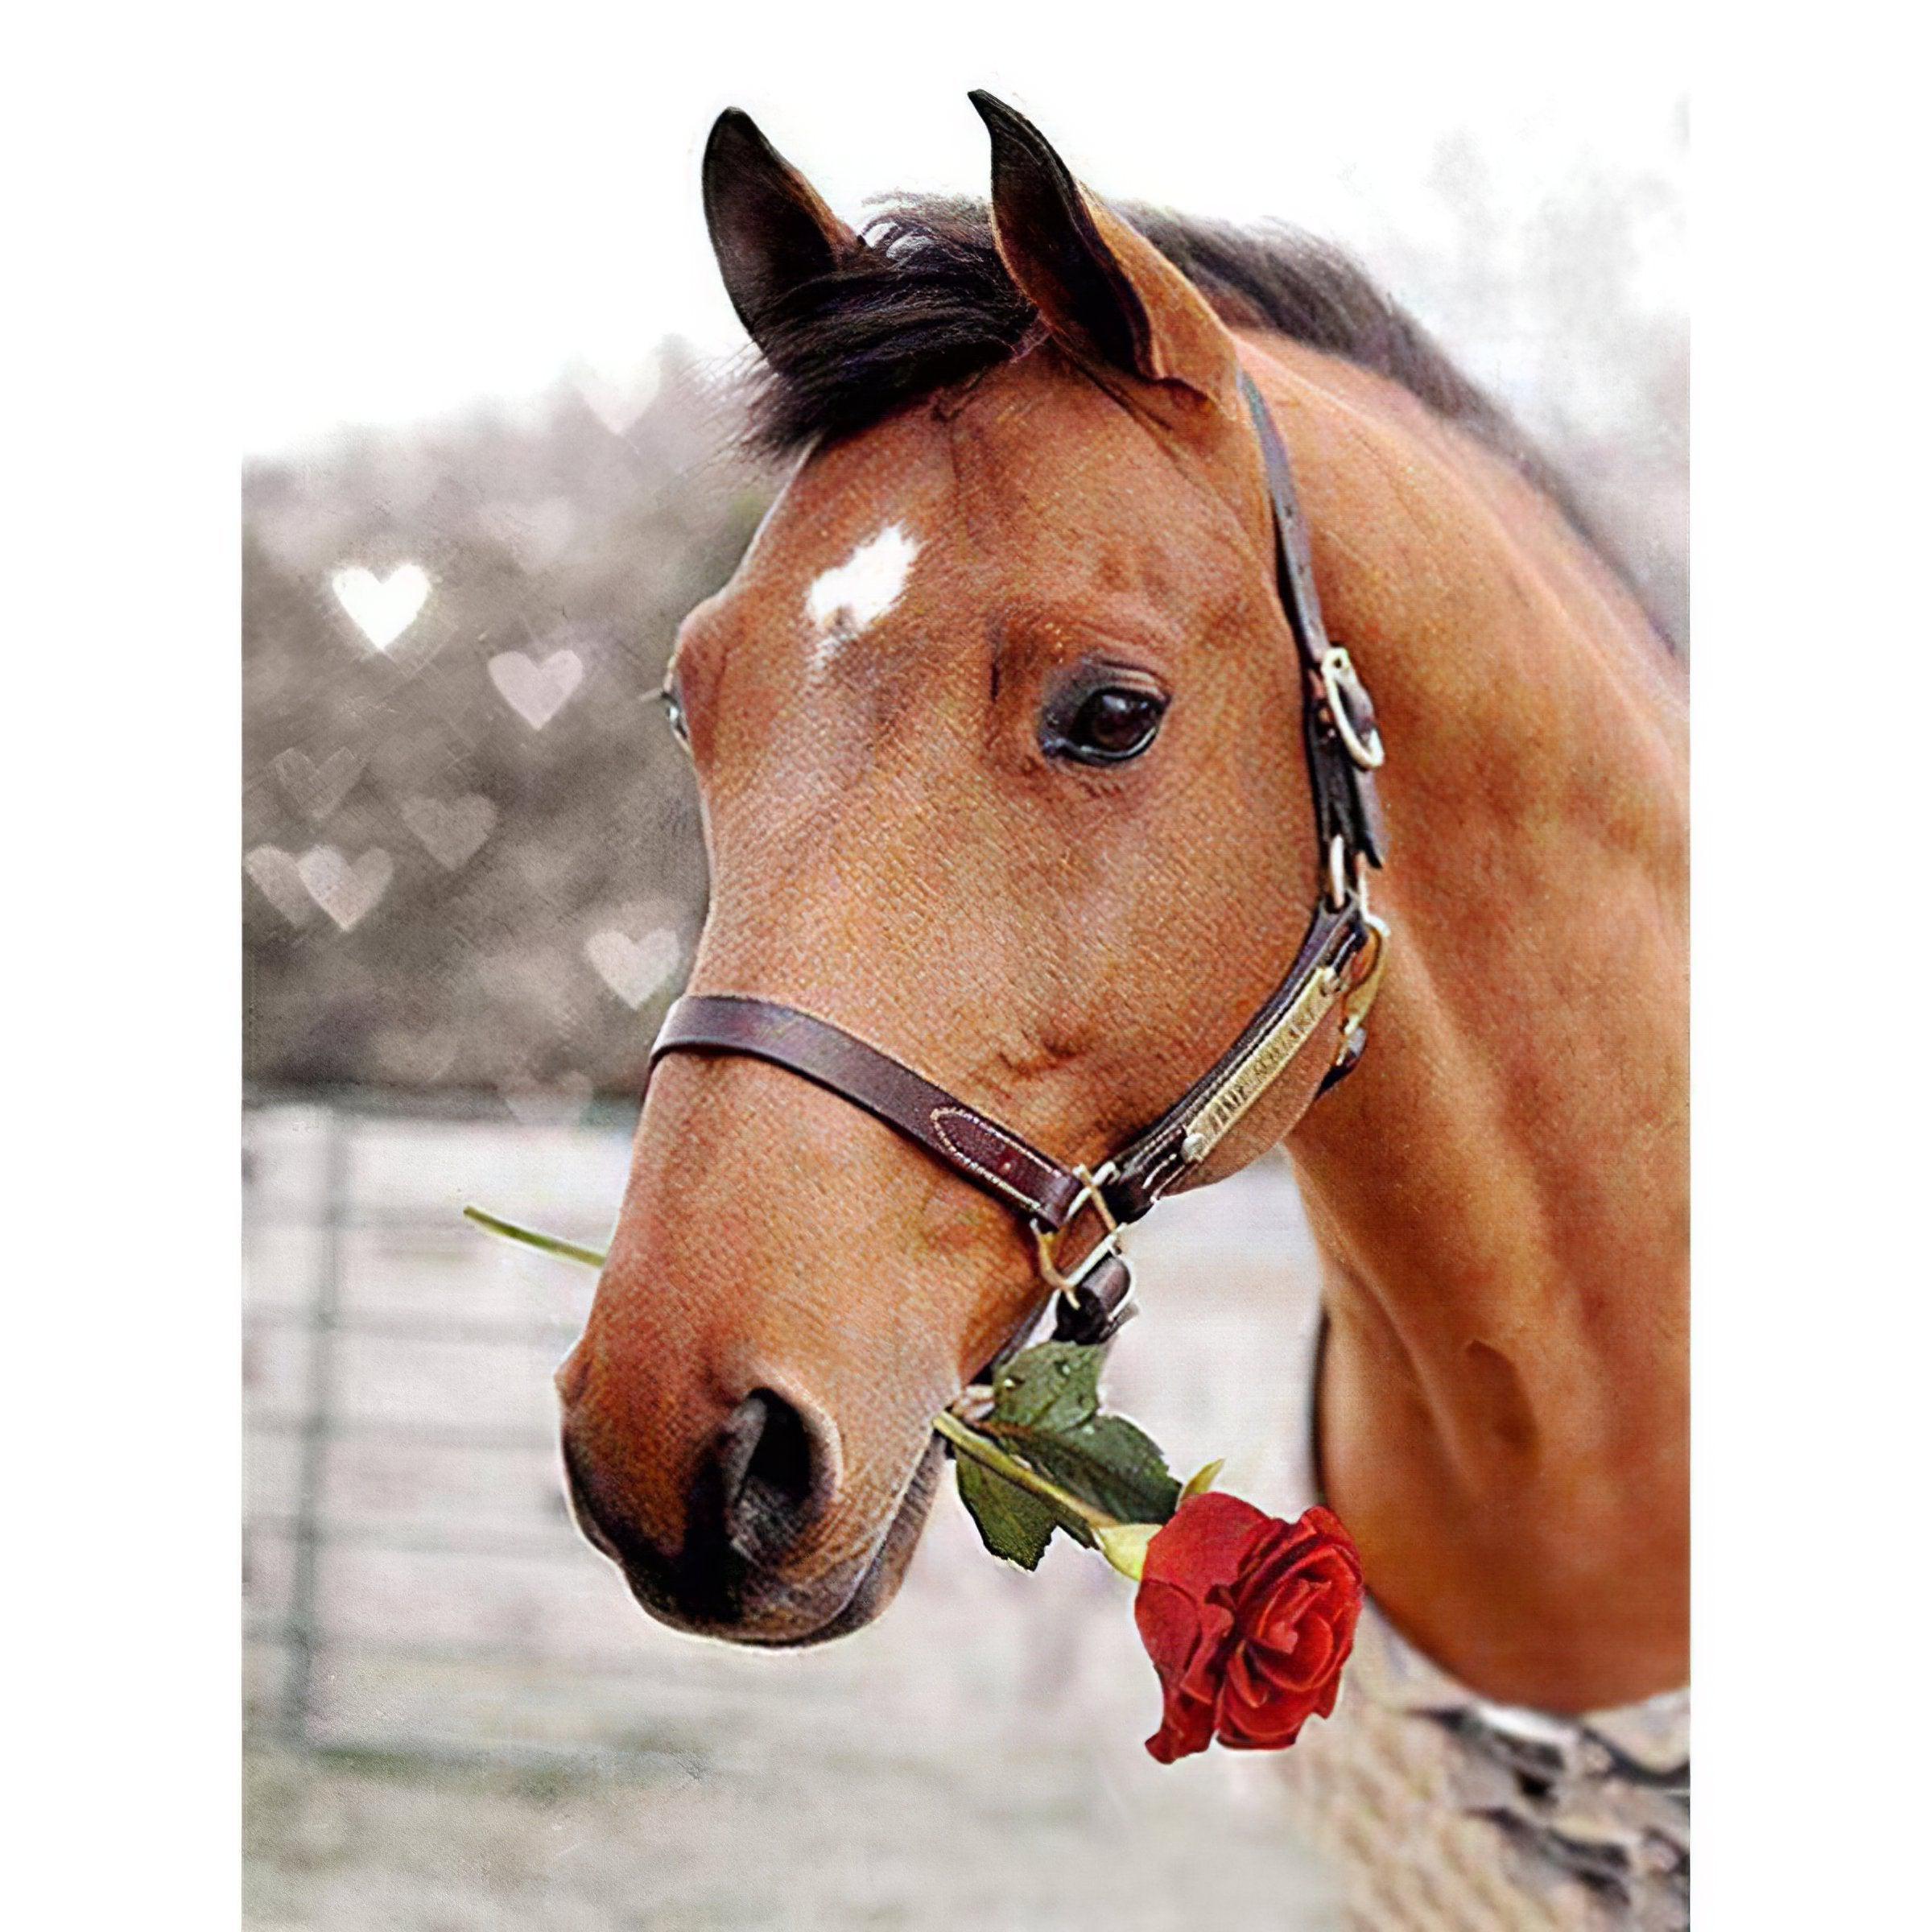 Experience romance with a Horse carrying a rose.Horse With Rose In The Mouth - Diamondartlove